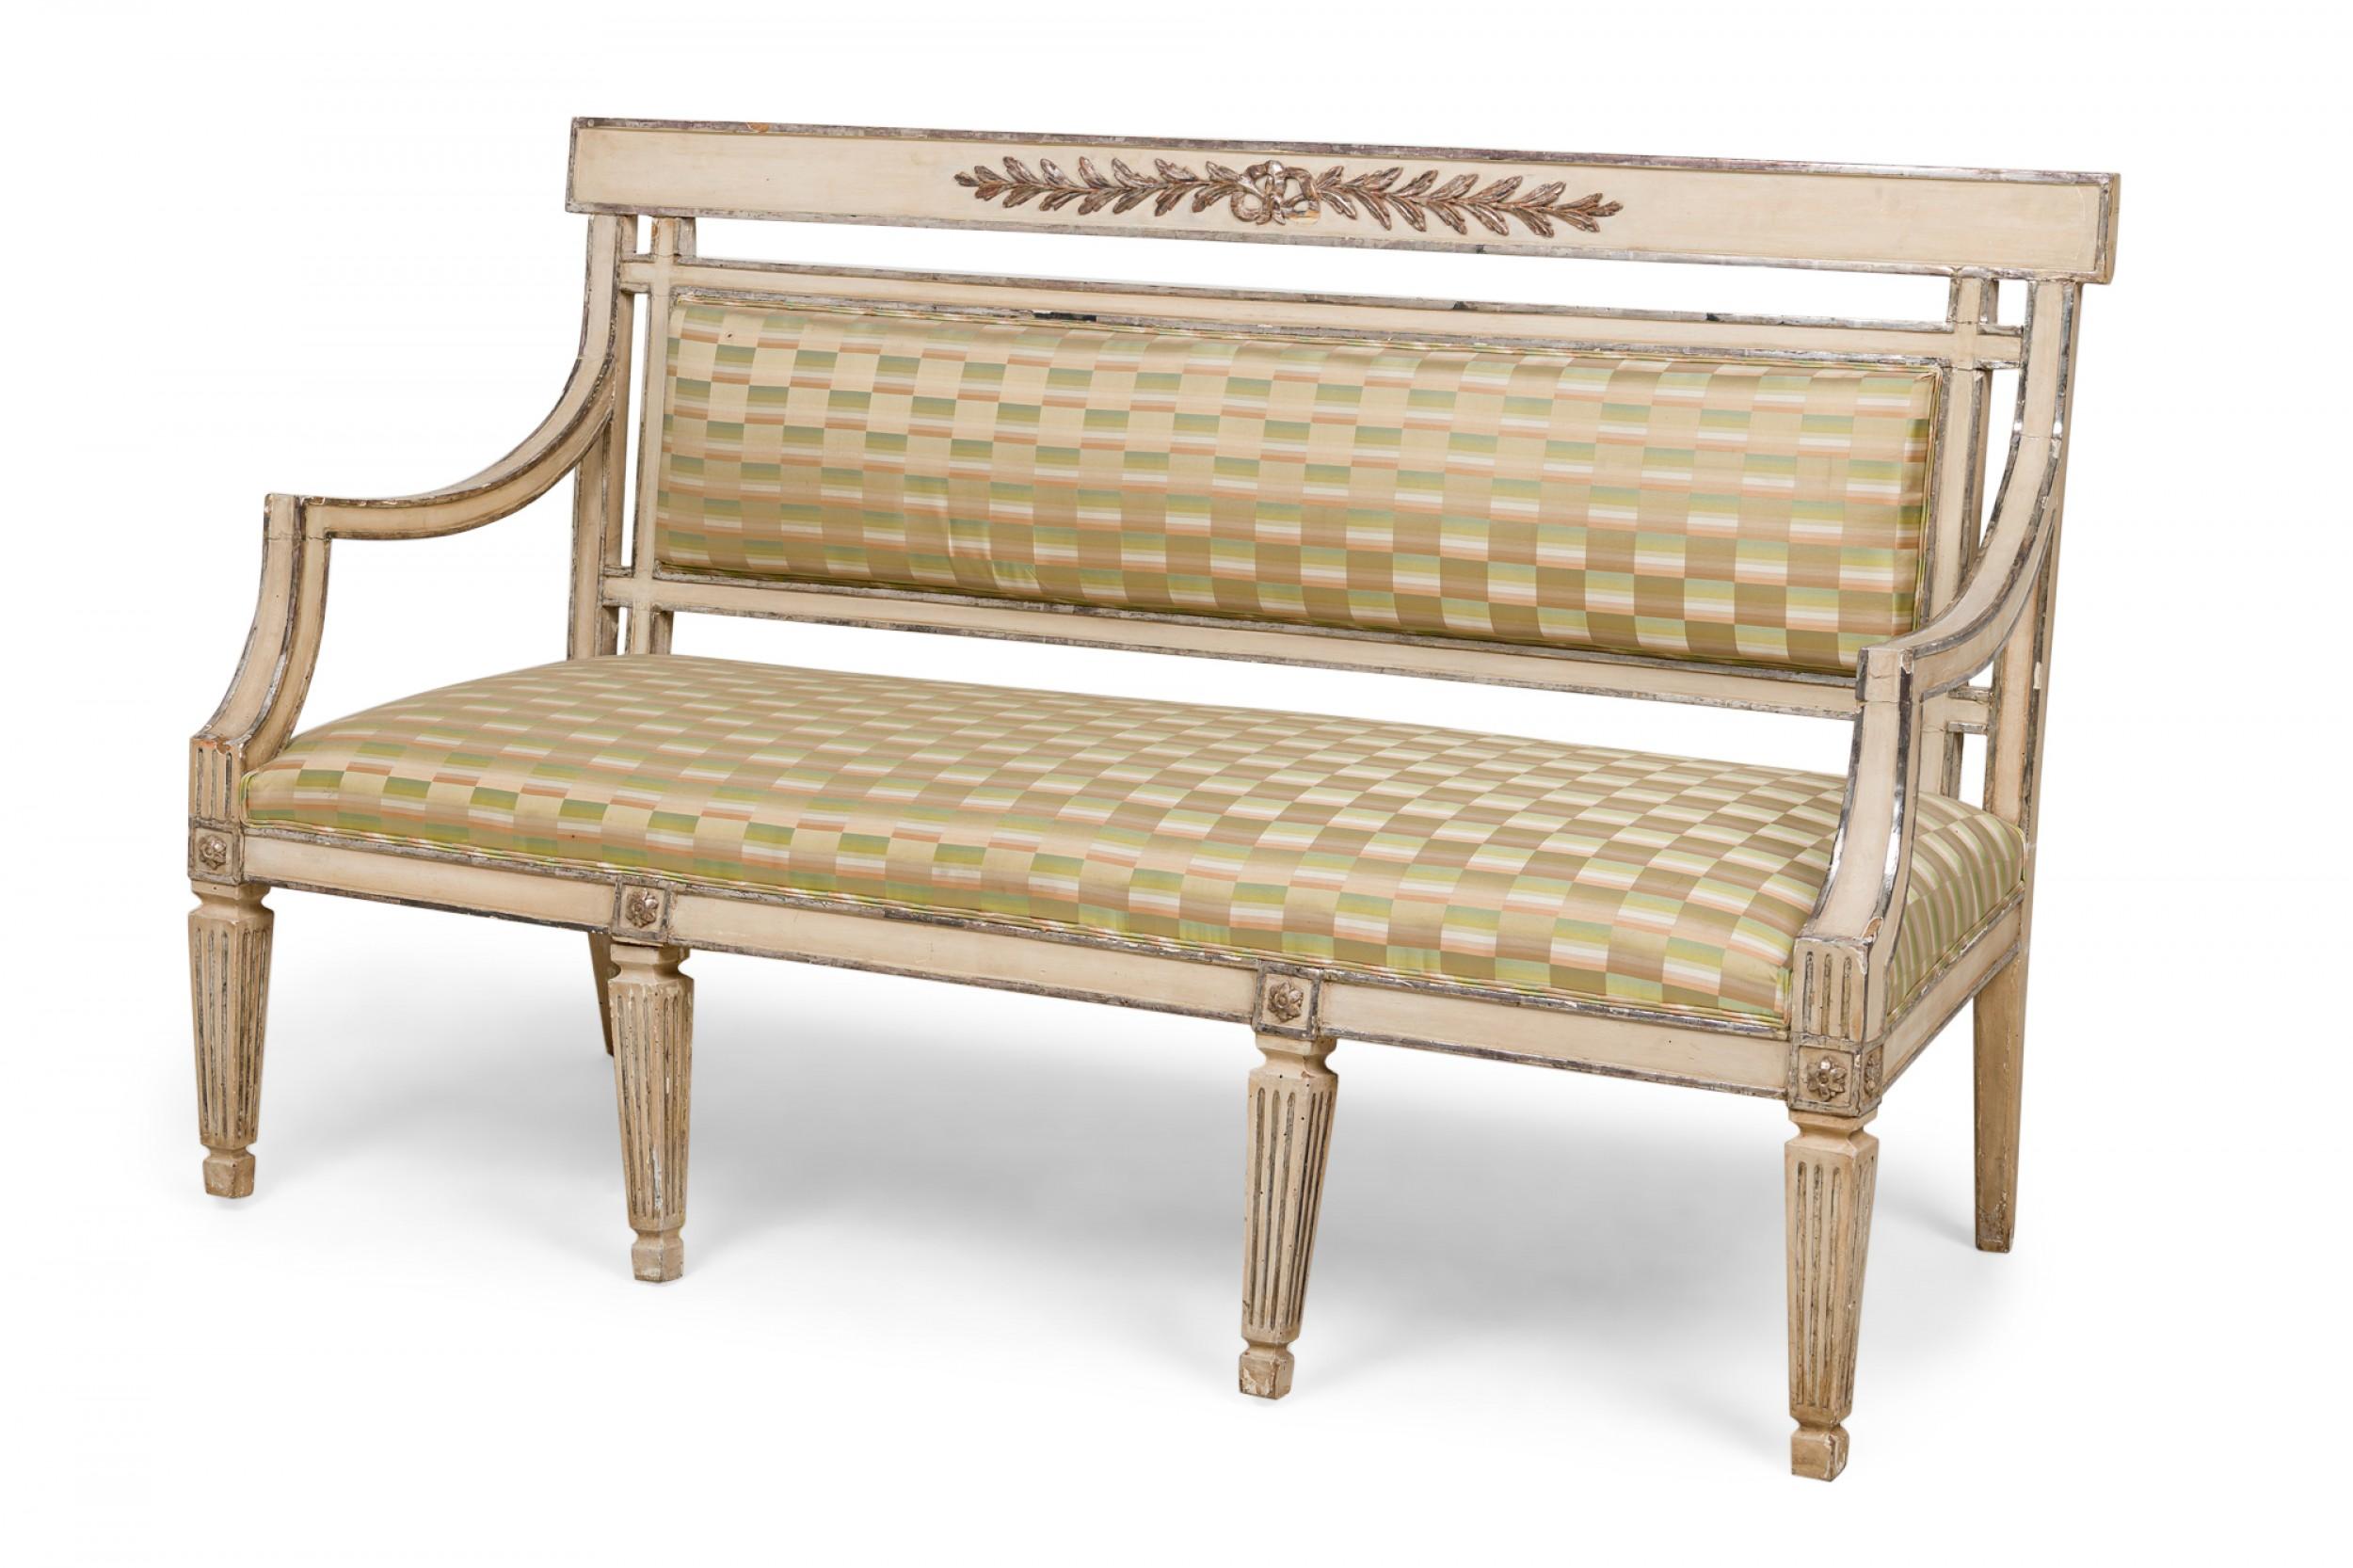 Swedish Neo-Classical settee with a carved wooden frame, painted white and parcel silver gilt, with decorative silver giltwood foliate carvings and rosettes, the seat and back upholstered in a checkered sage green and beige striped and checkered